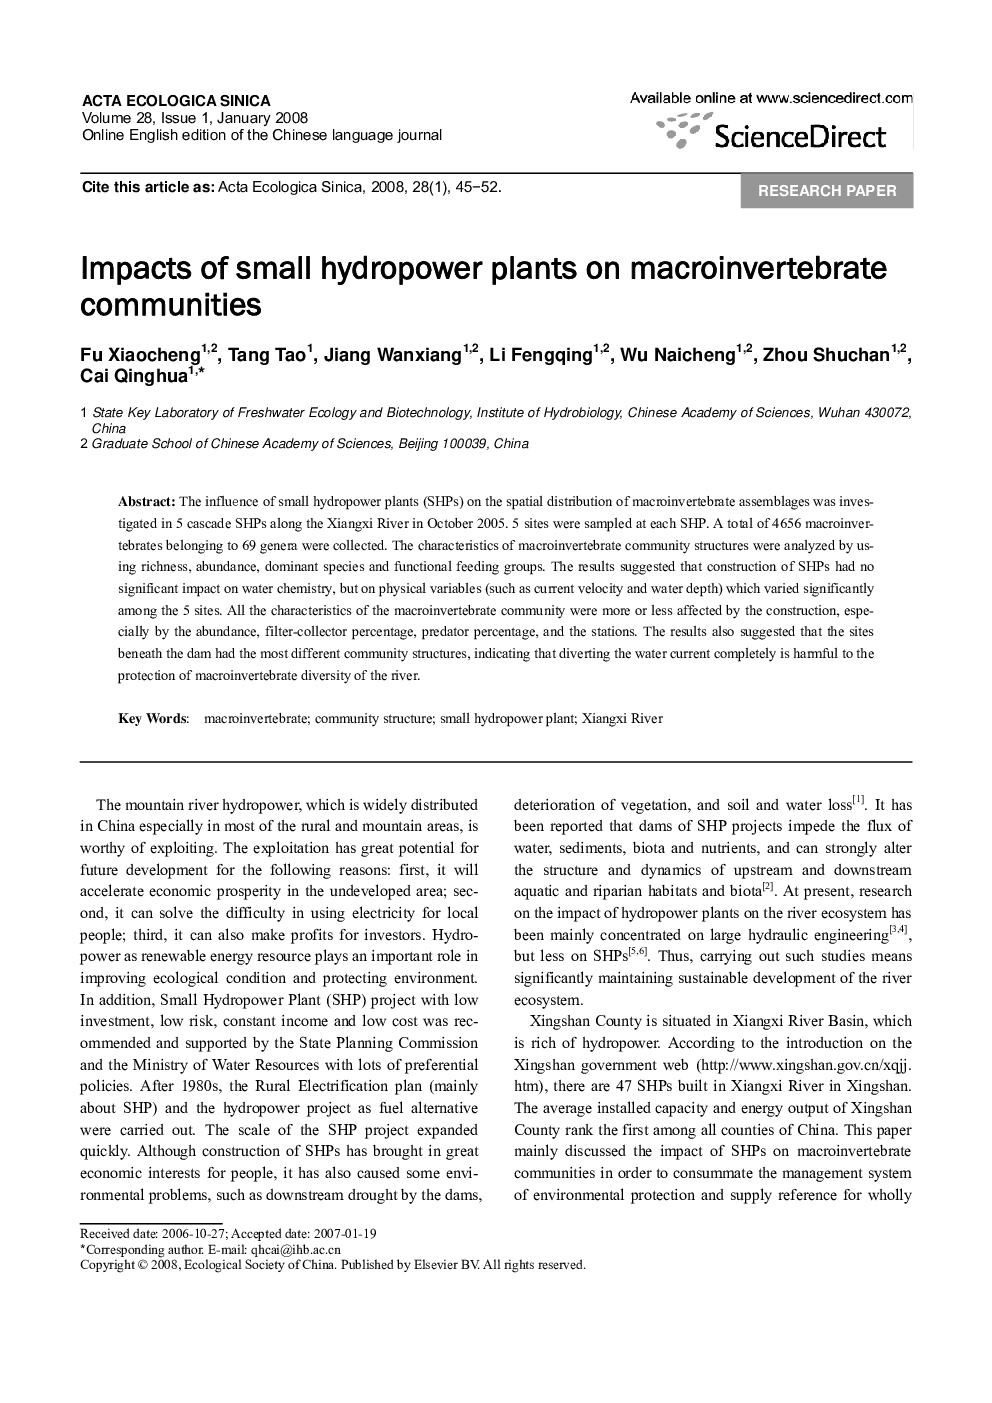 Impacts of small hydropower plants on macroinvertebrate communities